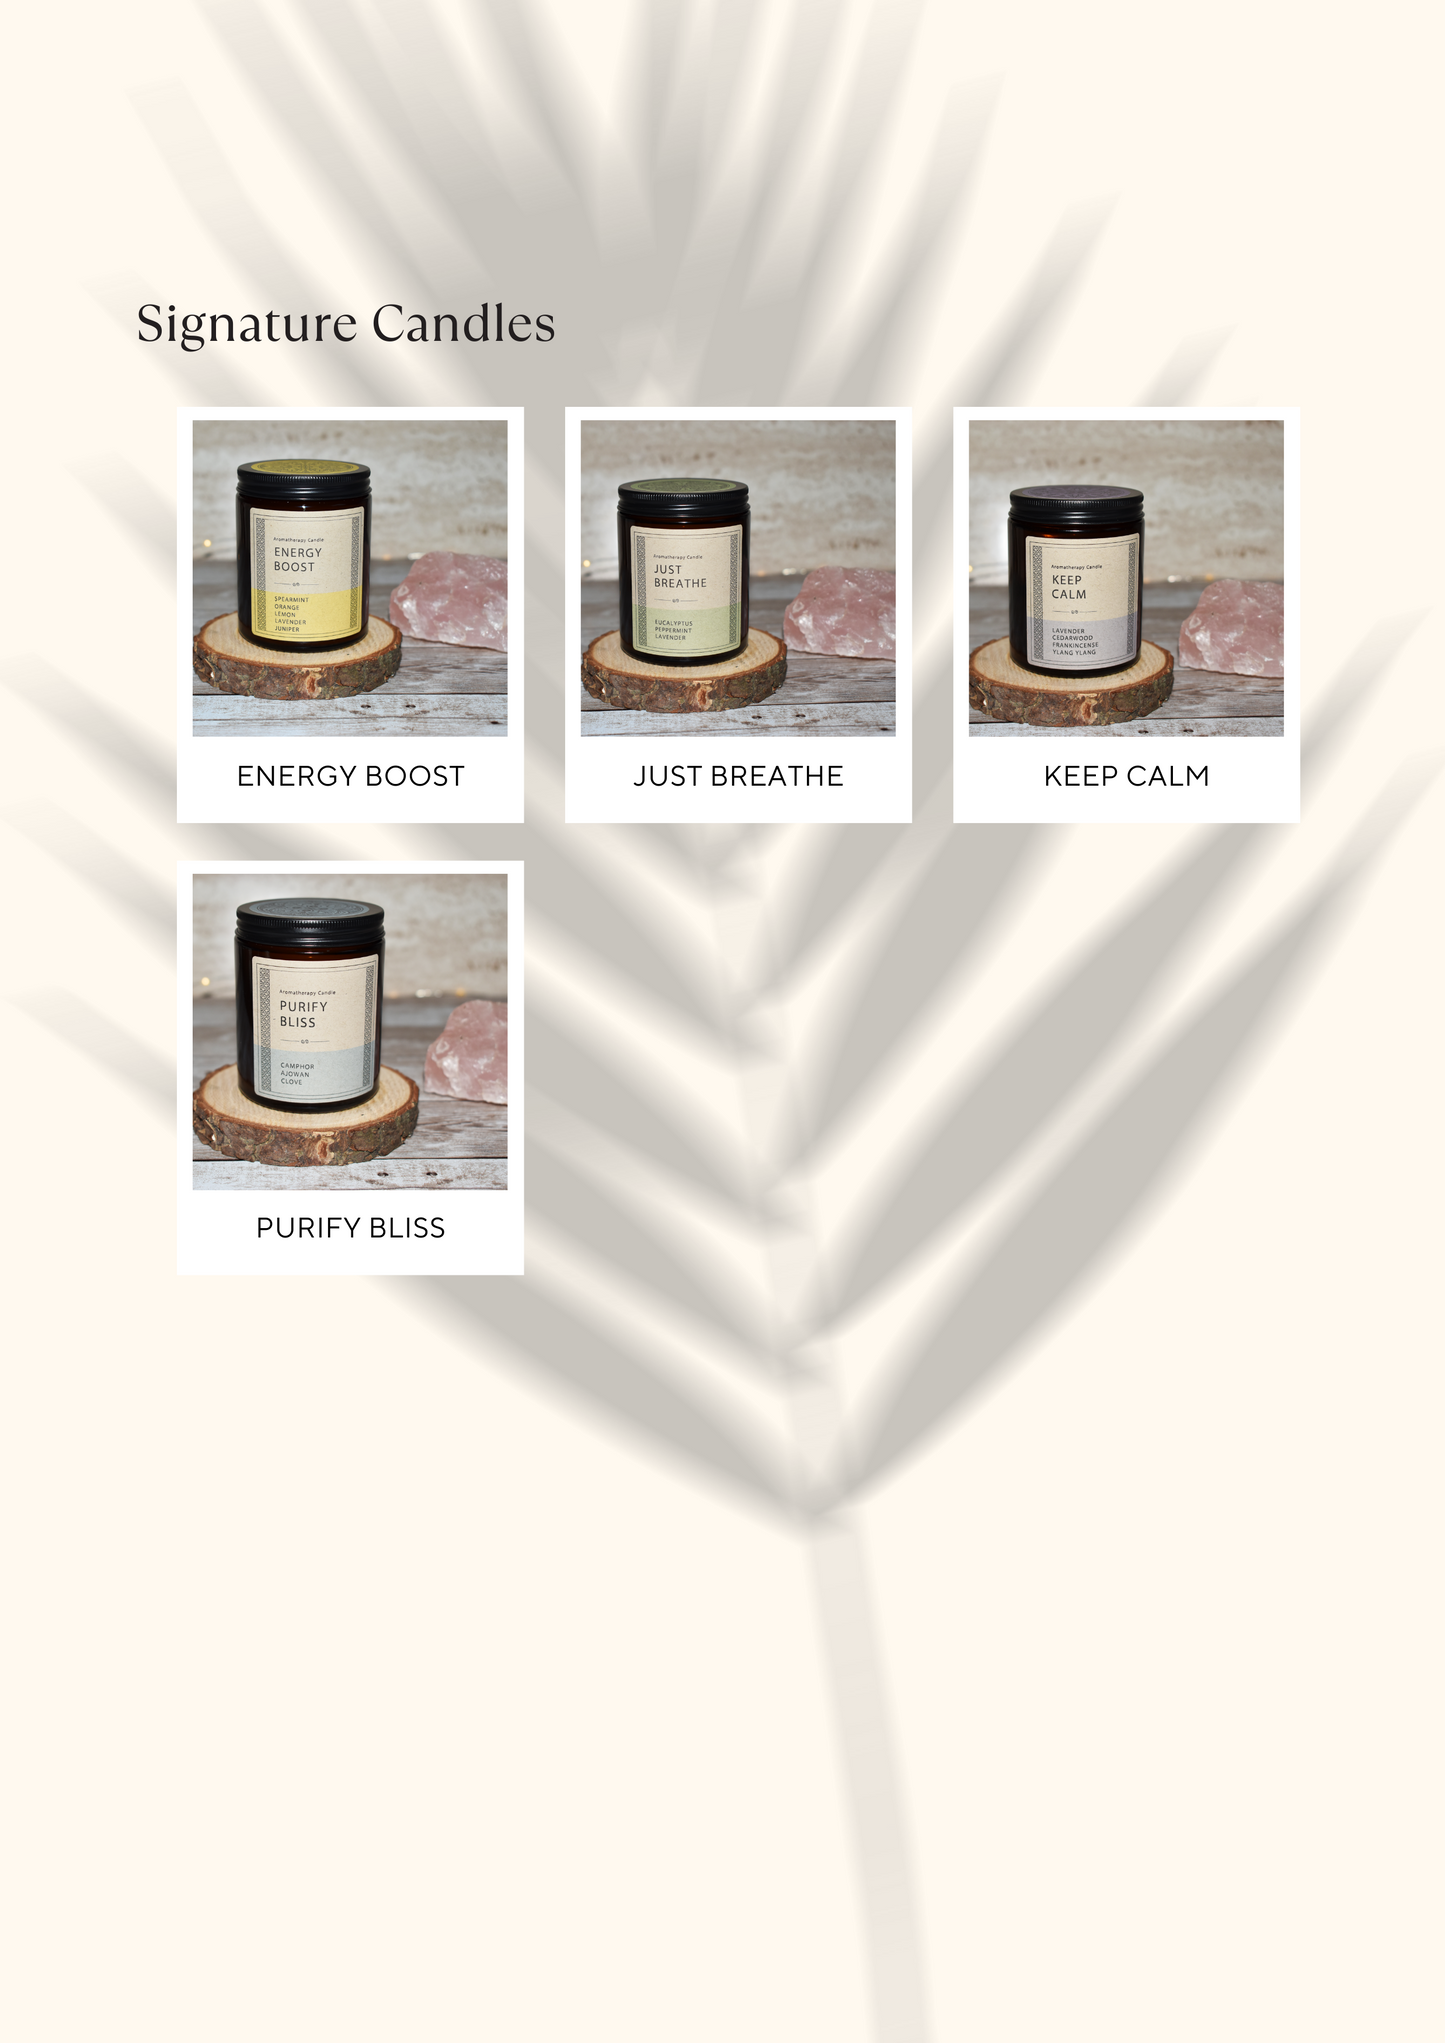 Econua "Candlelit Delight Mini" Hamper - Aromatherapy Candle in our Zodiac Scent or Signature Fragrance | Chocolate Bar | Tea | Personalised Seed Paper Card